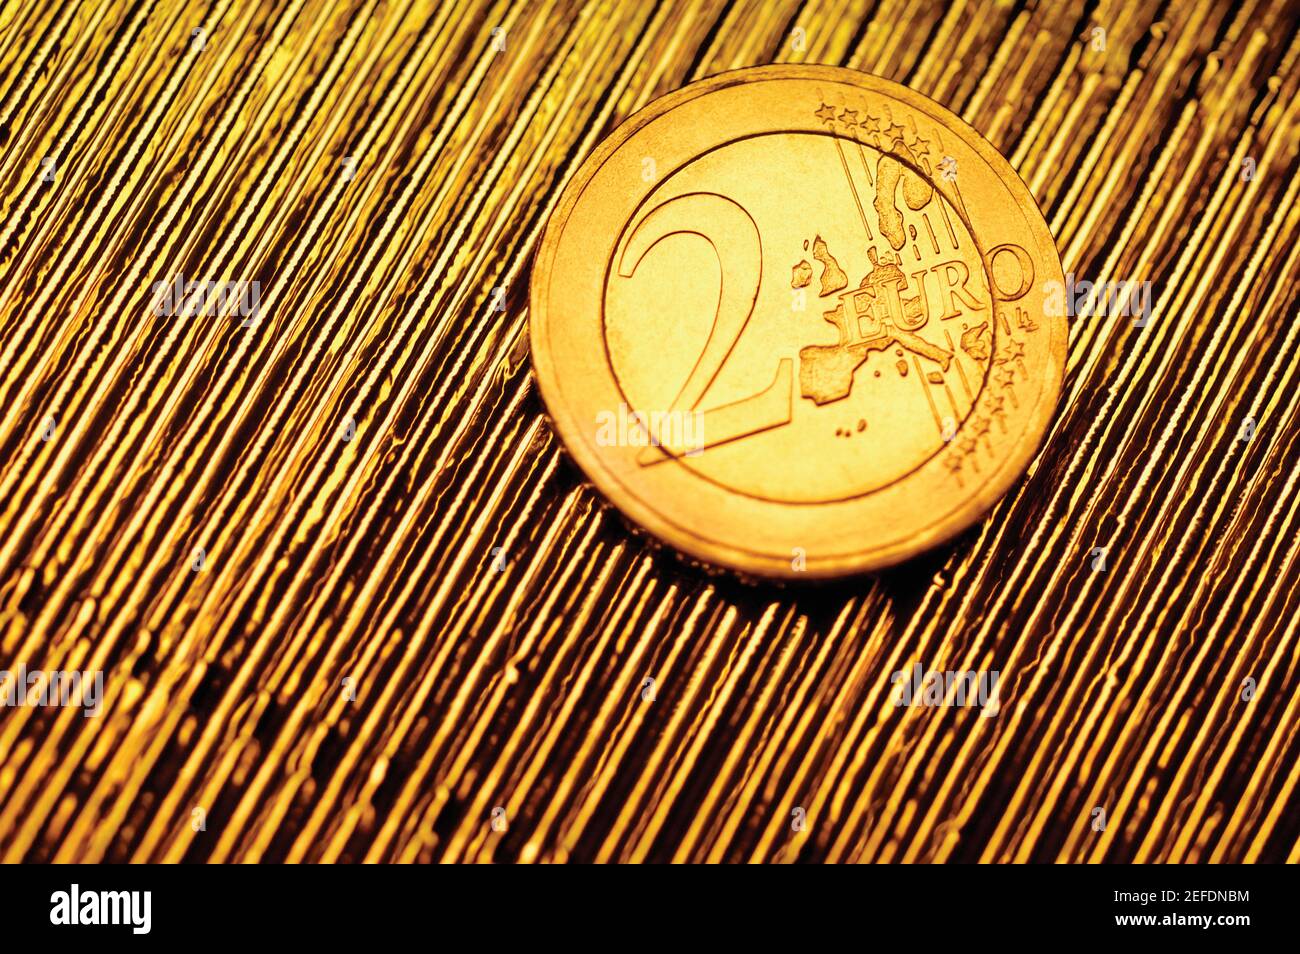 Close-up of Eurocent coin Stock Photo